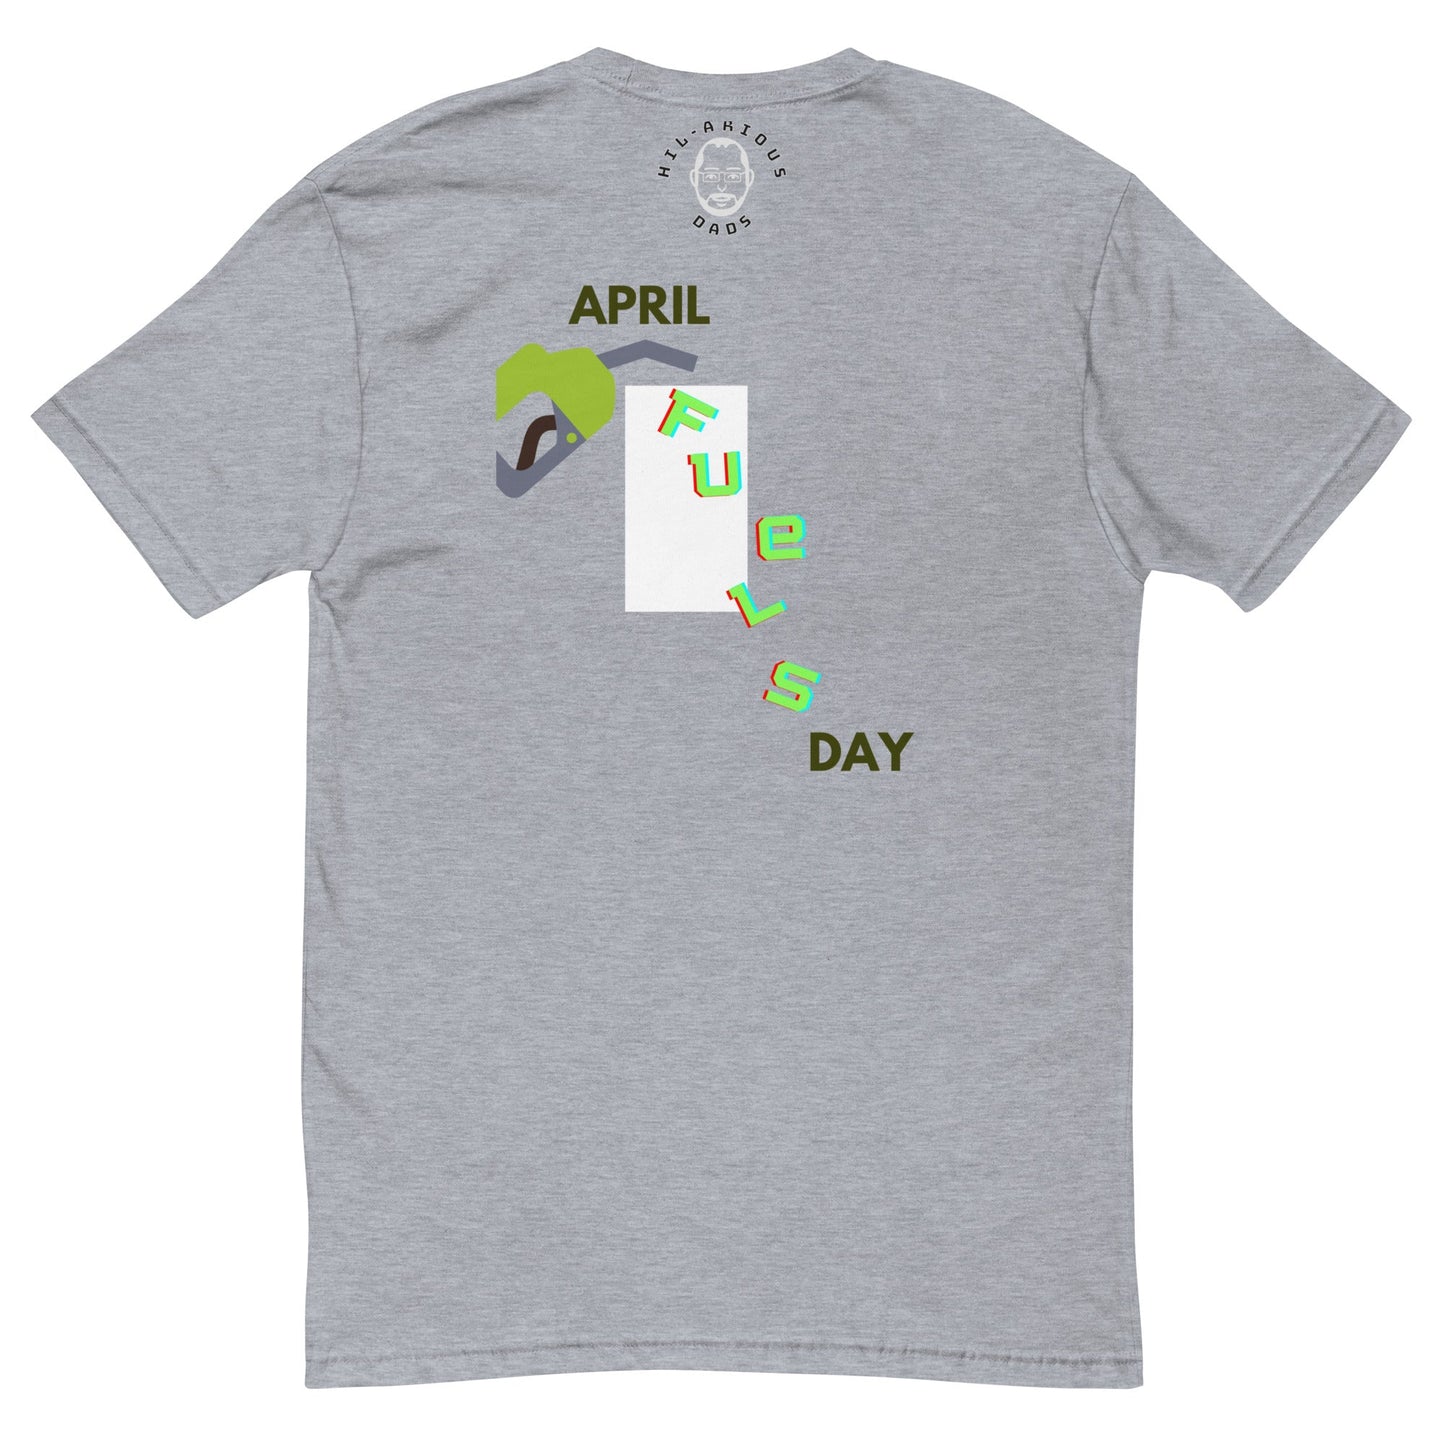 Which day of the year do diesel engines like the most?-T-shirt - Hil-arious Dads